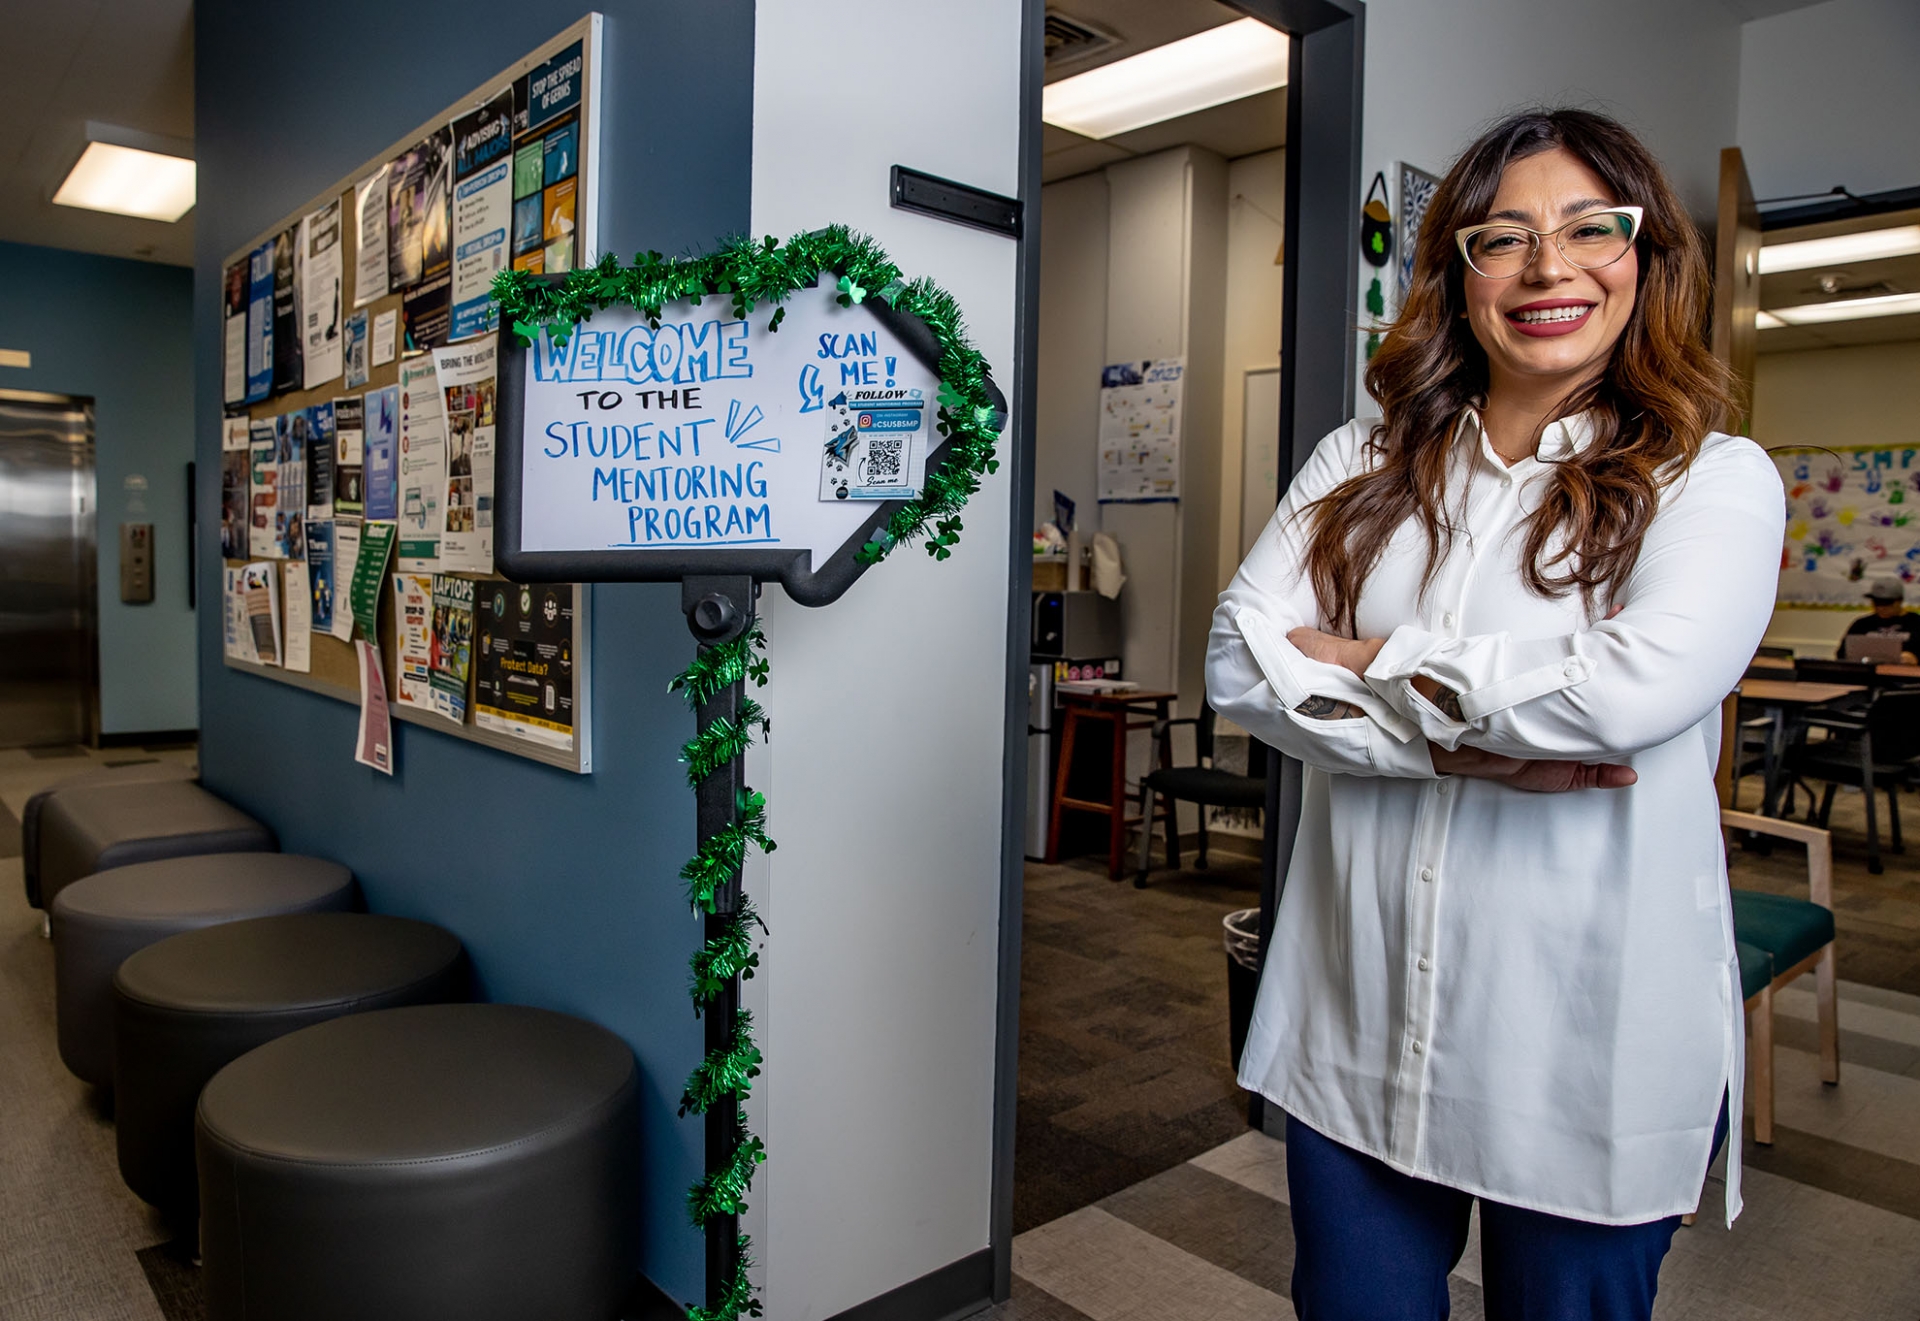 Sandy Castillo credits Edwin Hernandez, an associate professor in special education rehabilitation and counseling, and Barbara Herrera, the coordinator of the CSUSB Student Mentoring Program for helping her during her time at CSUSB.